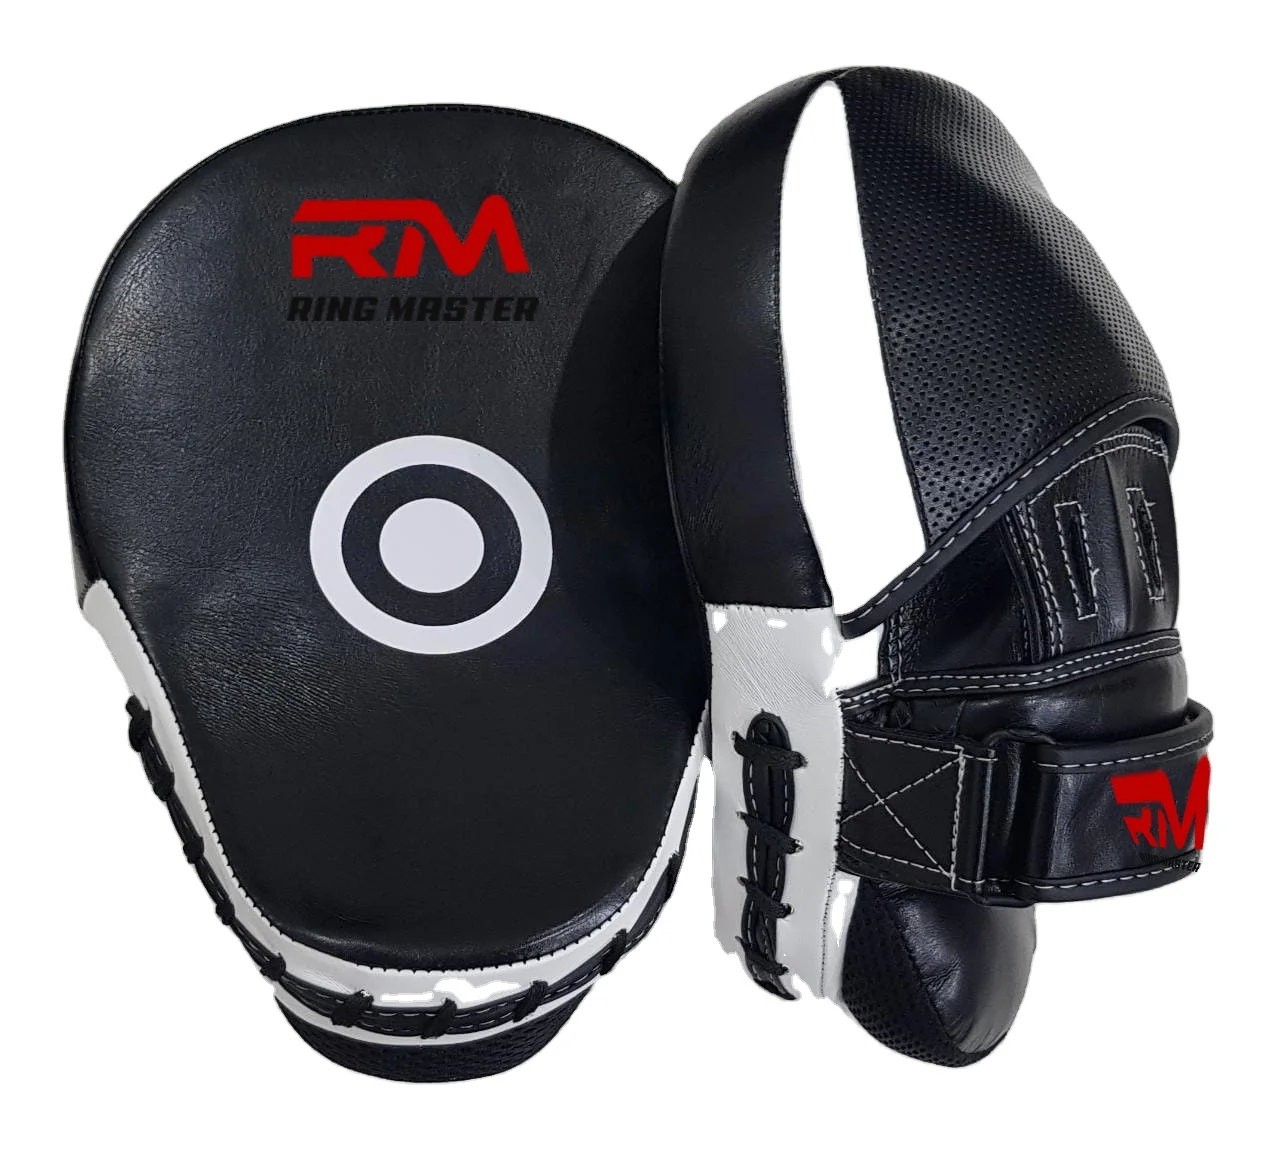 Boxing Gloves & Focus Mitts Set For MMA Muay Thai Kickboxing Training Punching 